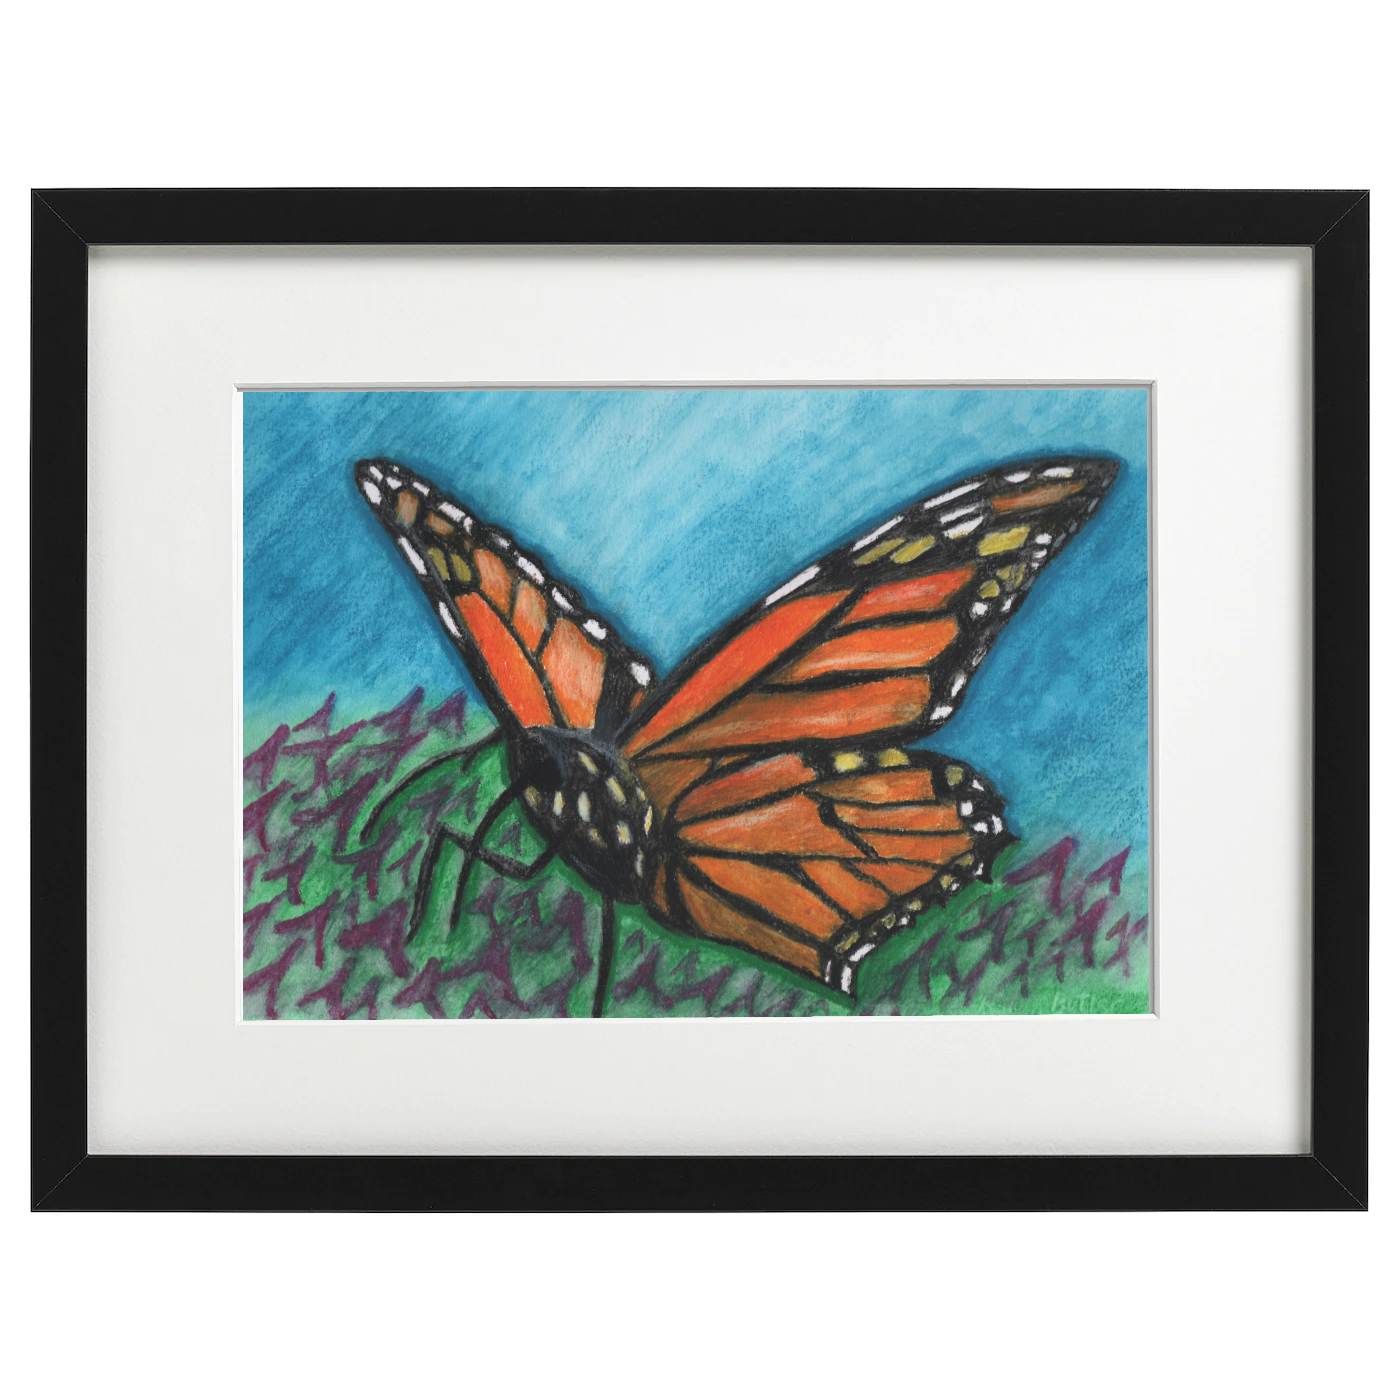 Butterfly - Watercolour crayon on A4 Watercolour paper